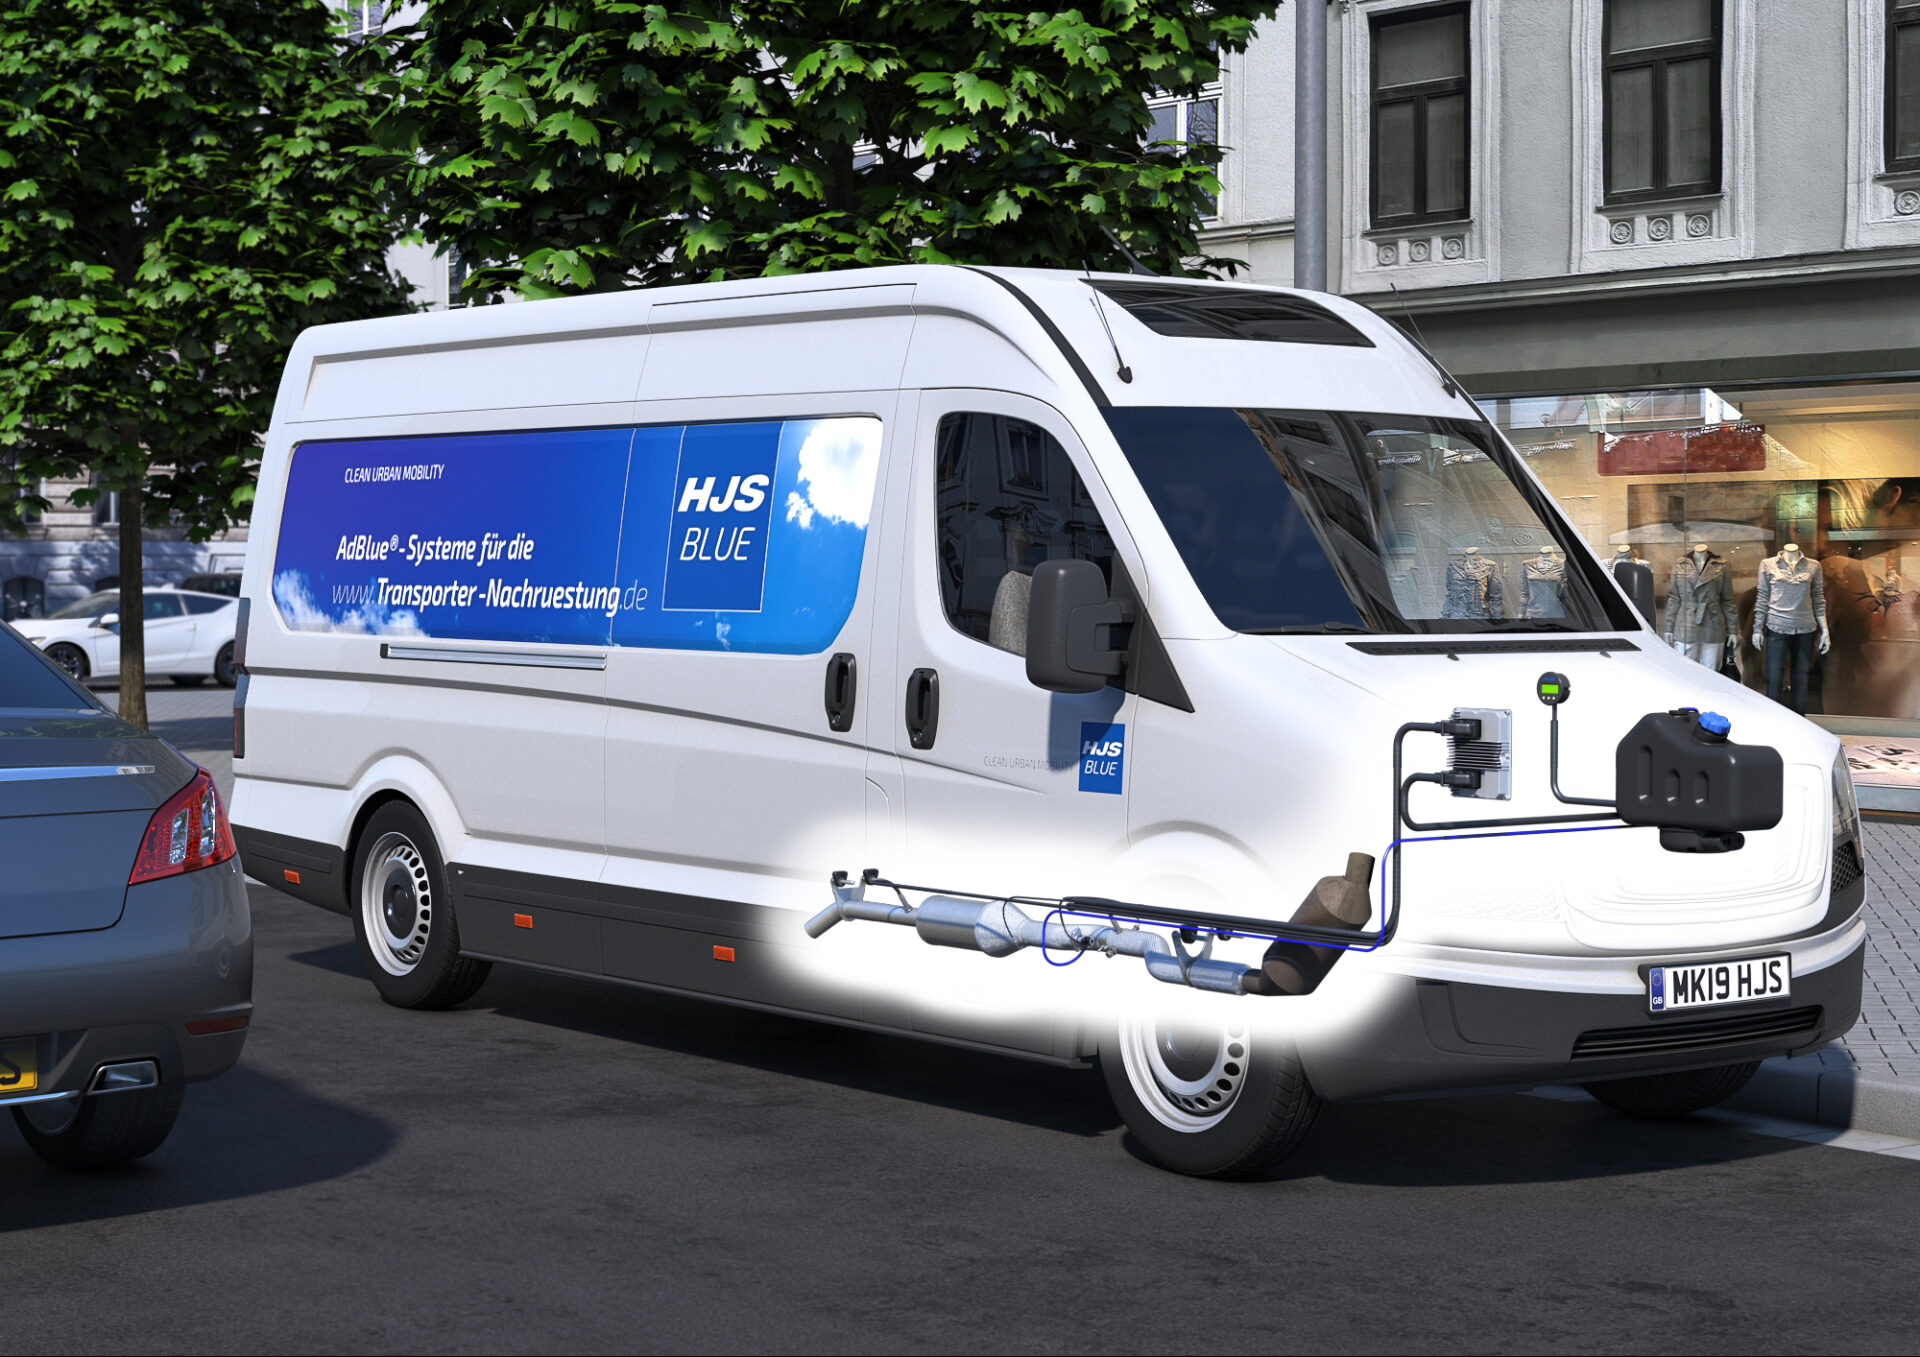 AdBlue® - For clean mobility